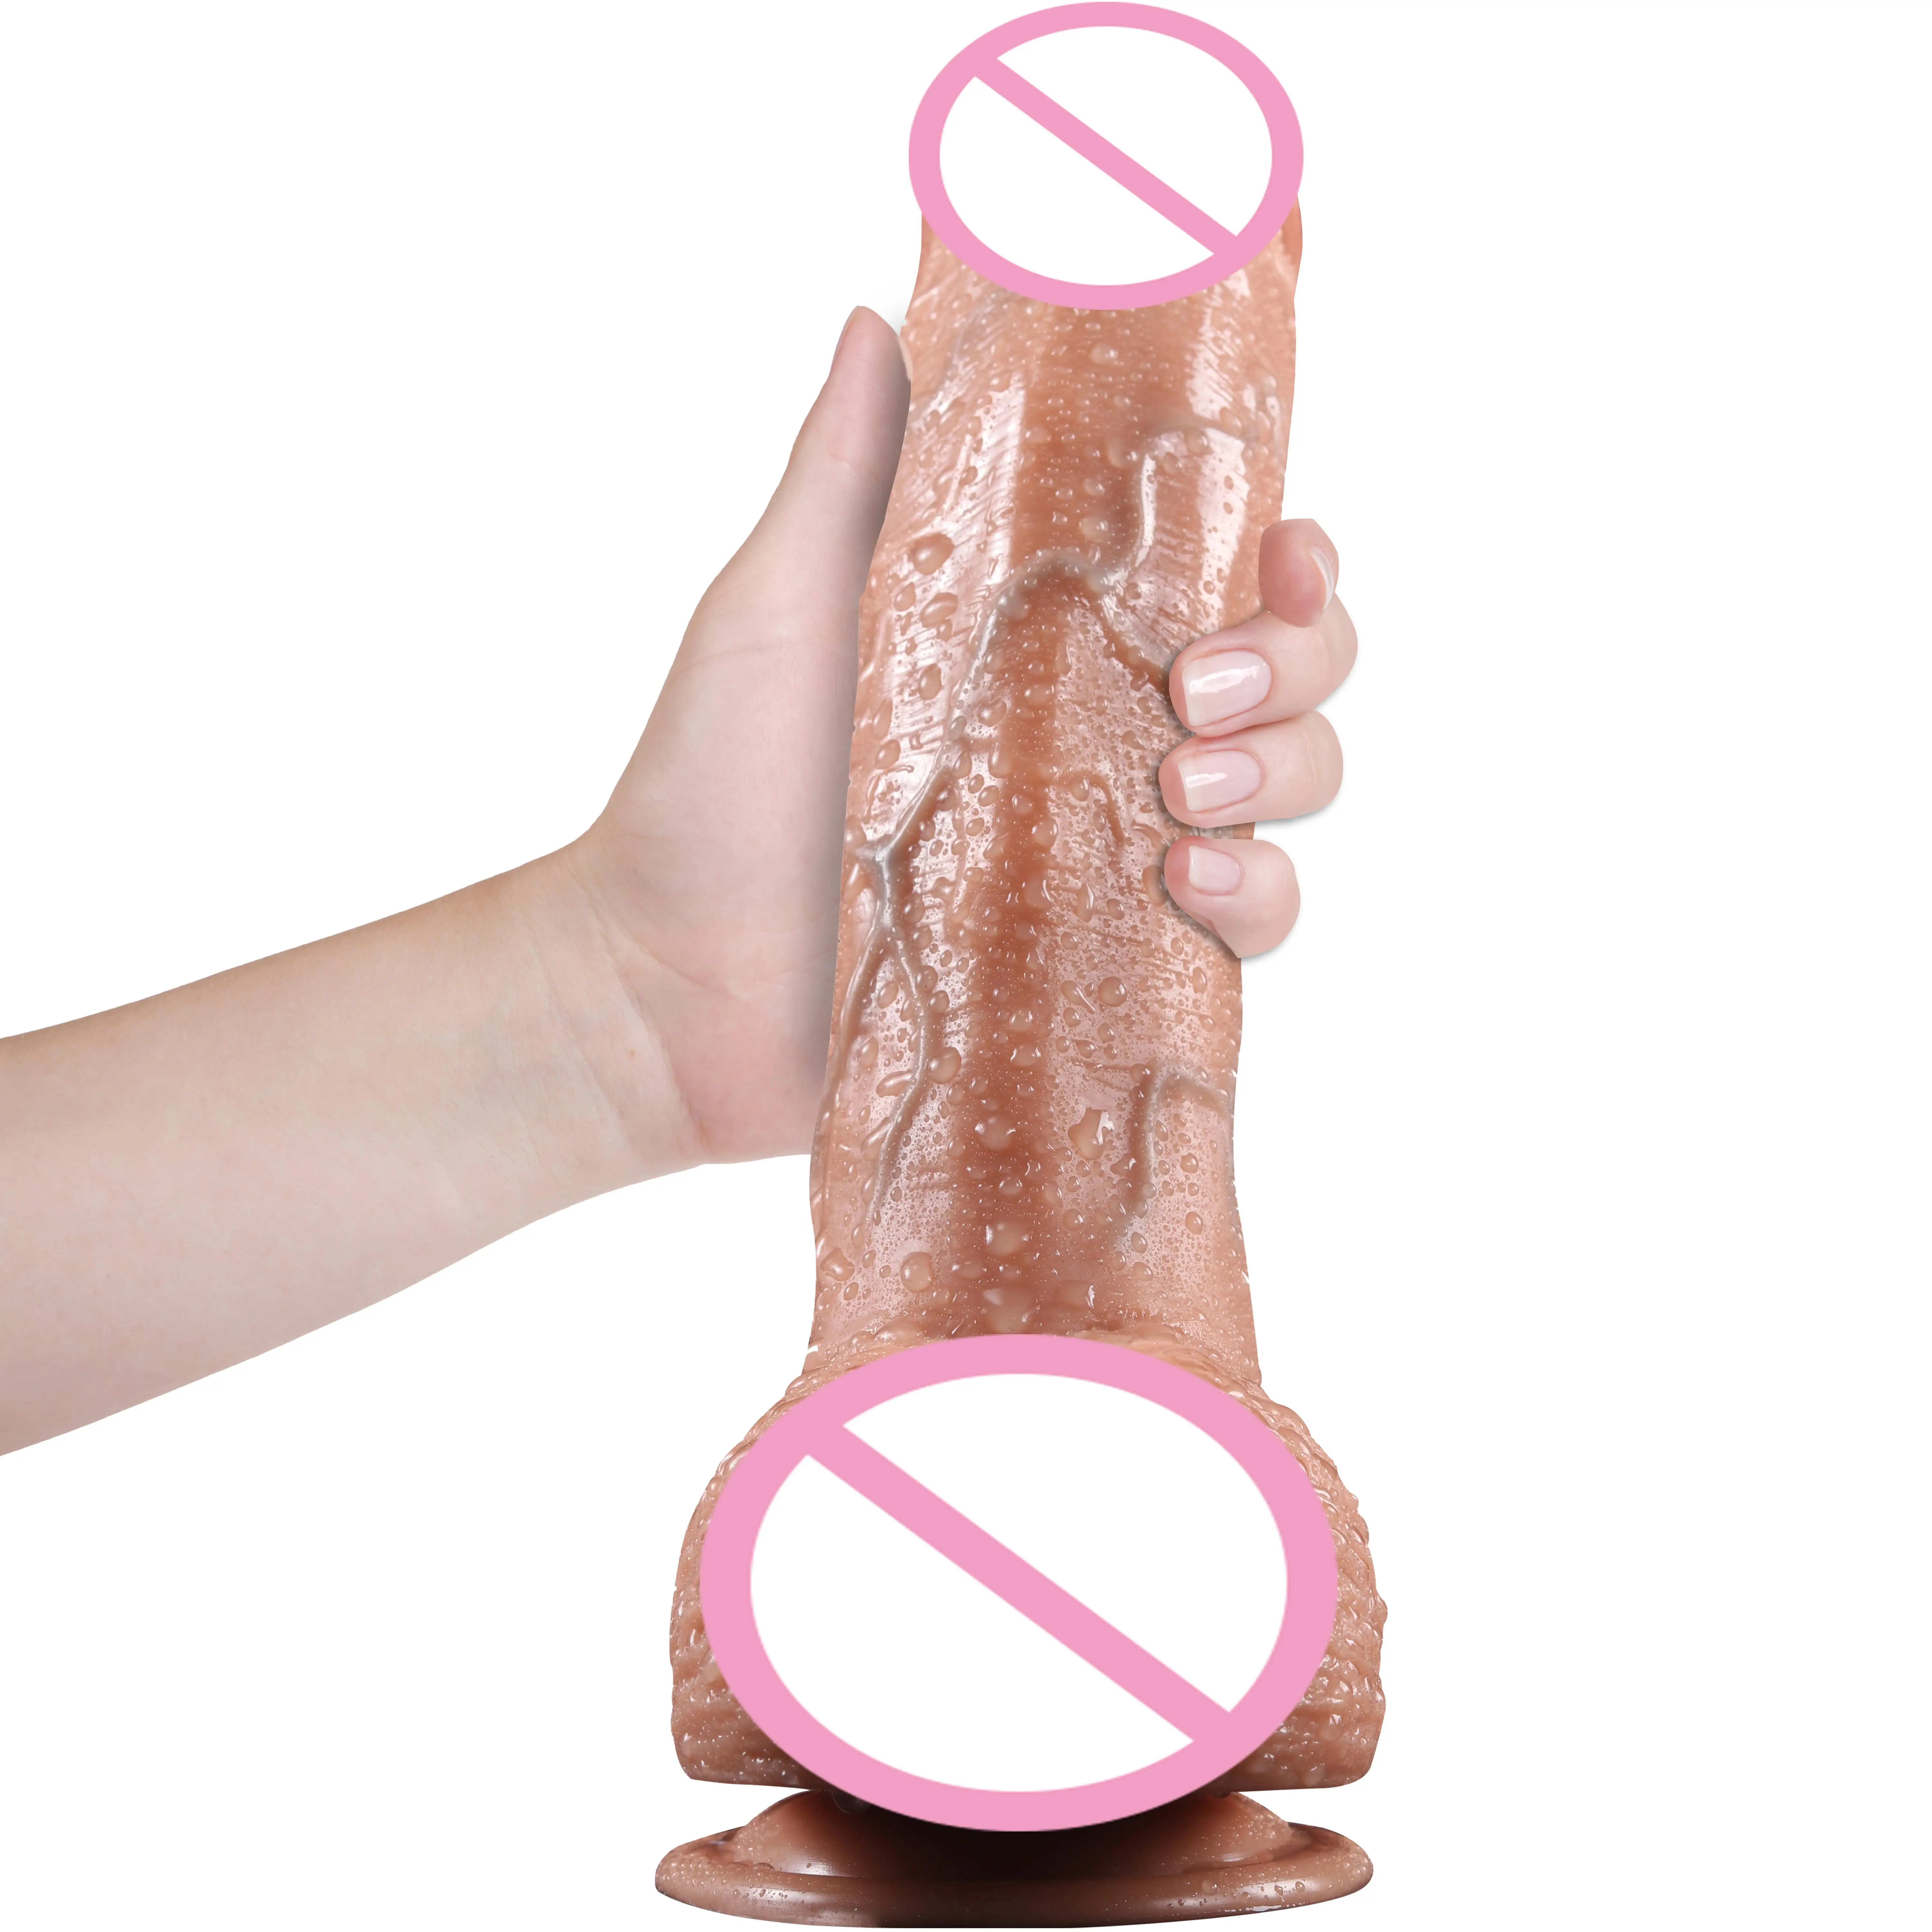 Adult 9 inches realistic thick grandes silicone artificial realistic penis sex toy dildos for women lady masturbating sex toys